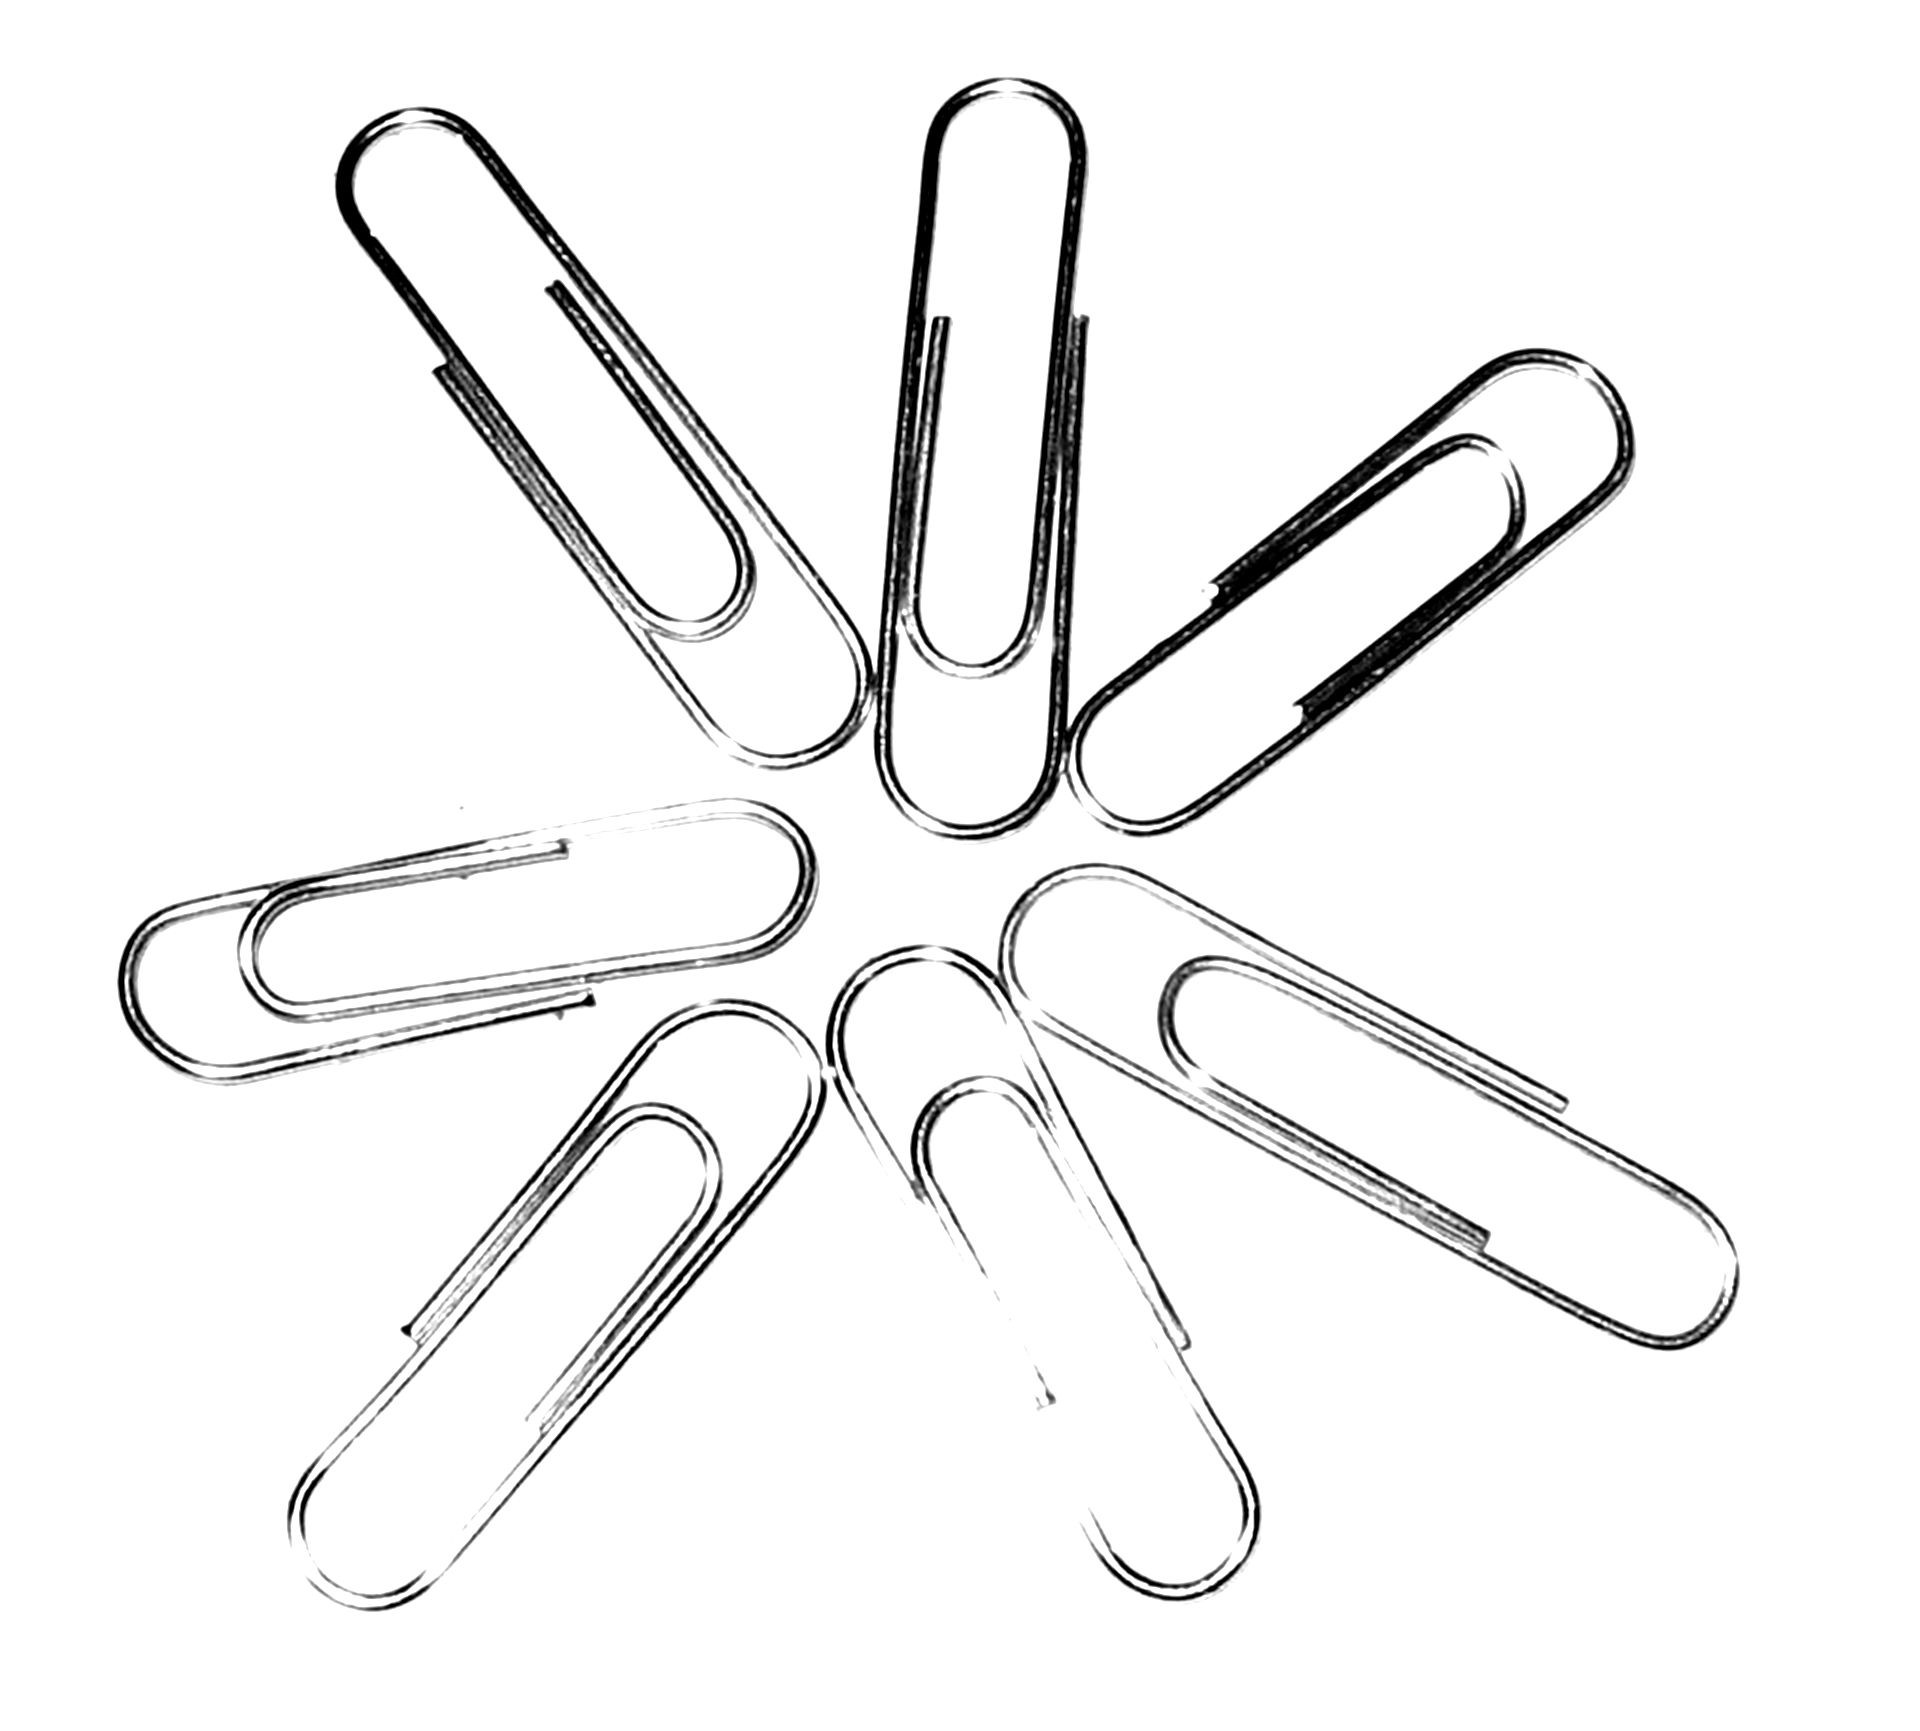 photograph of 6 paper clips